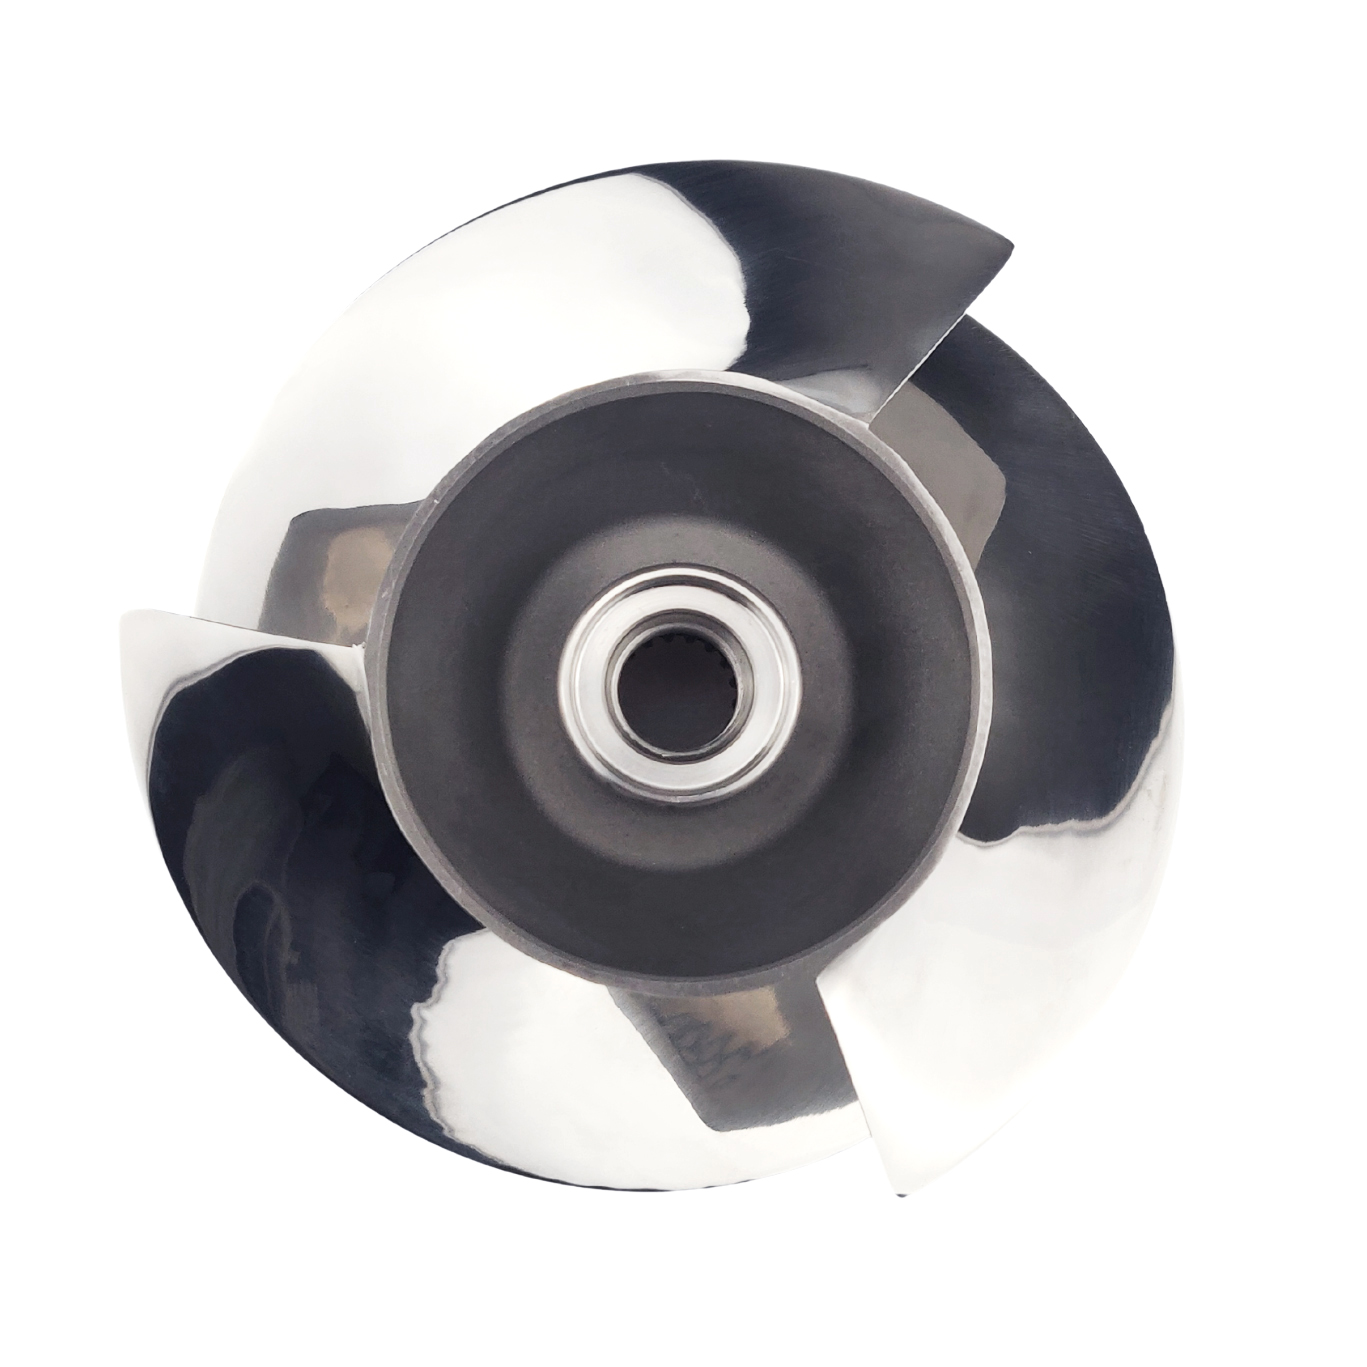 Jet Ski Impeller Diameter 140mm Matched With Seadoo 2014-New SPARK ACE 900 SPARK ACE 900 HO SPARK TRIXX SK-CD-13/18